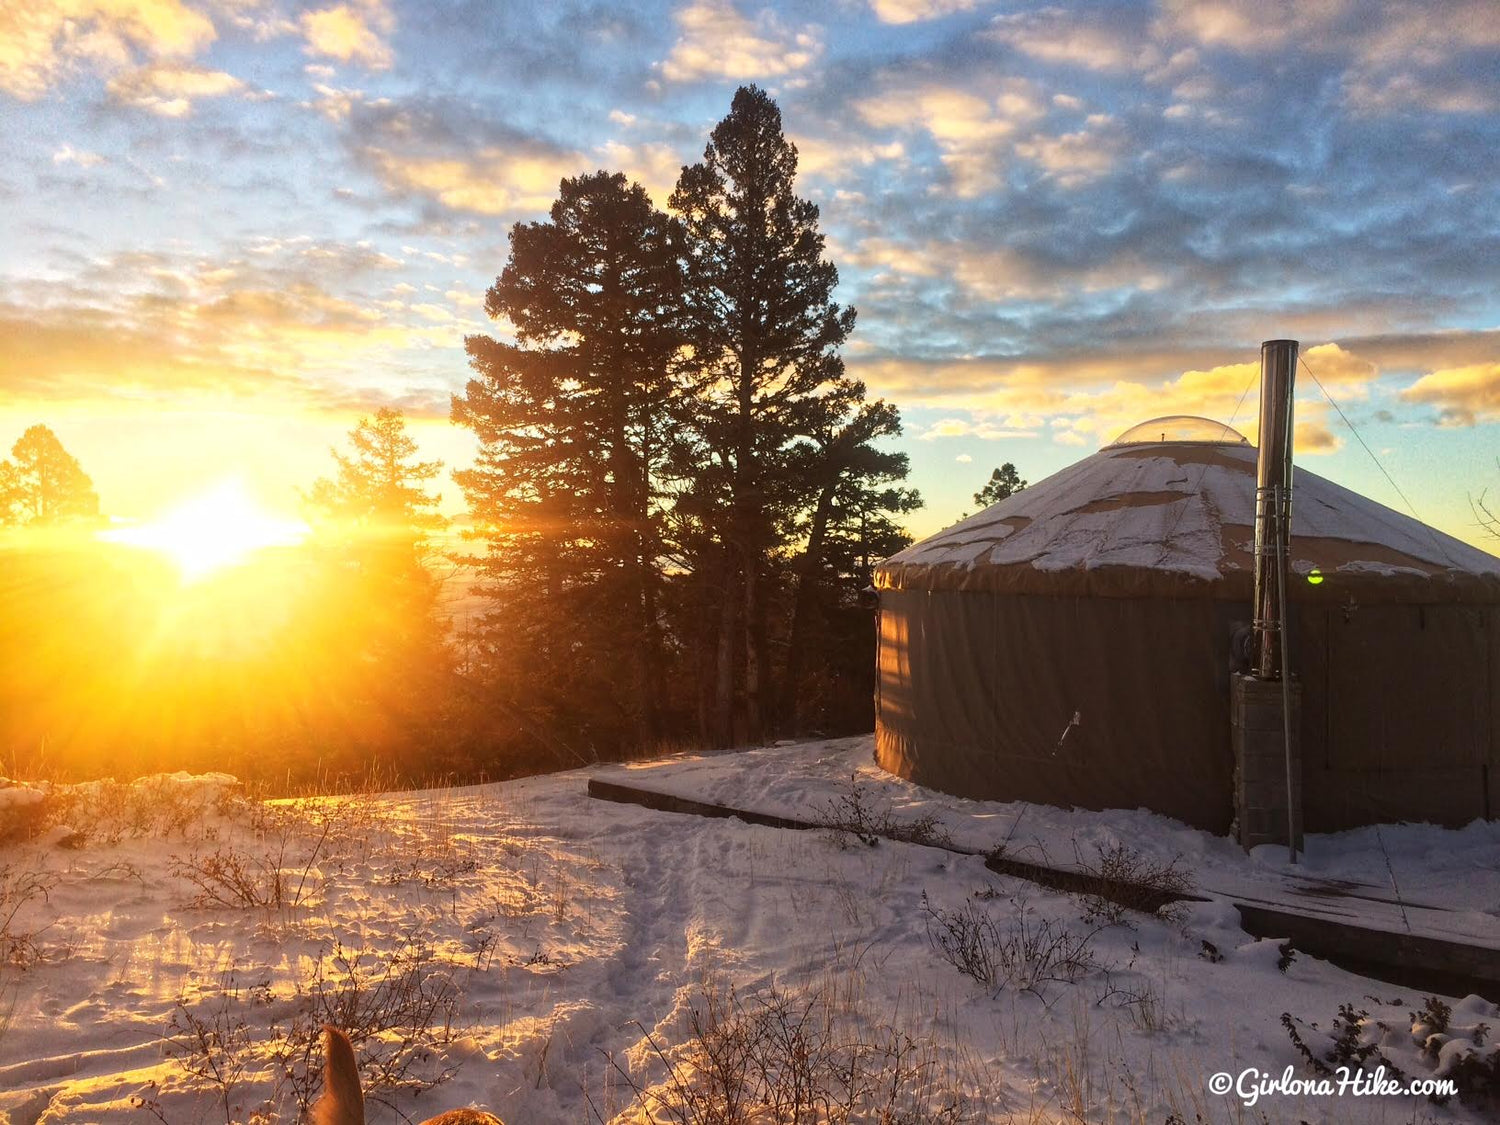 Make Glamping in a Yurt Your Next Big Adventure, By Alicia "Girl on a Hike" Baker